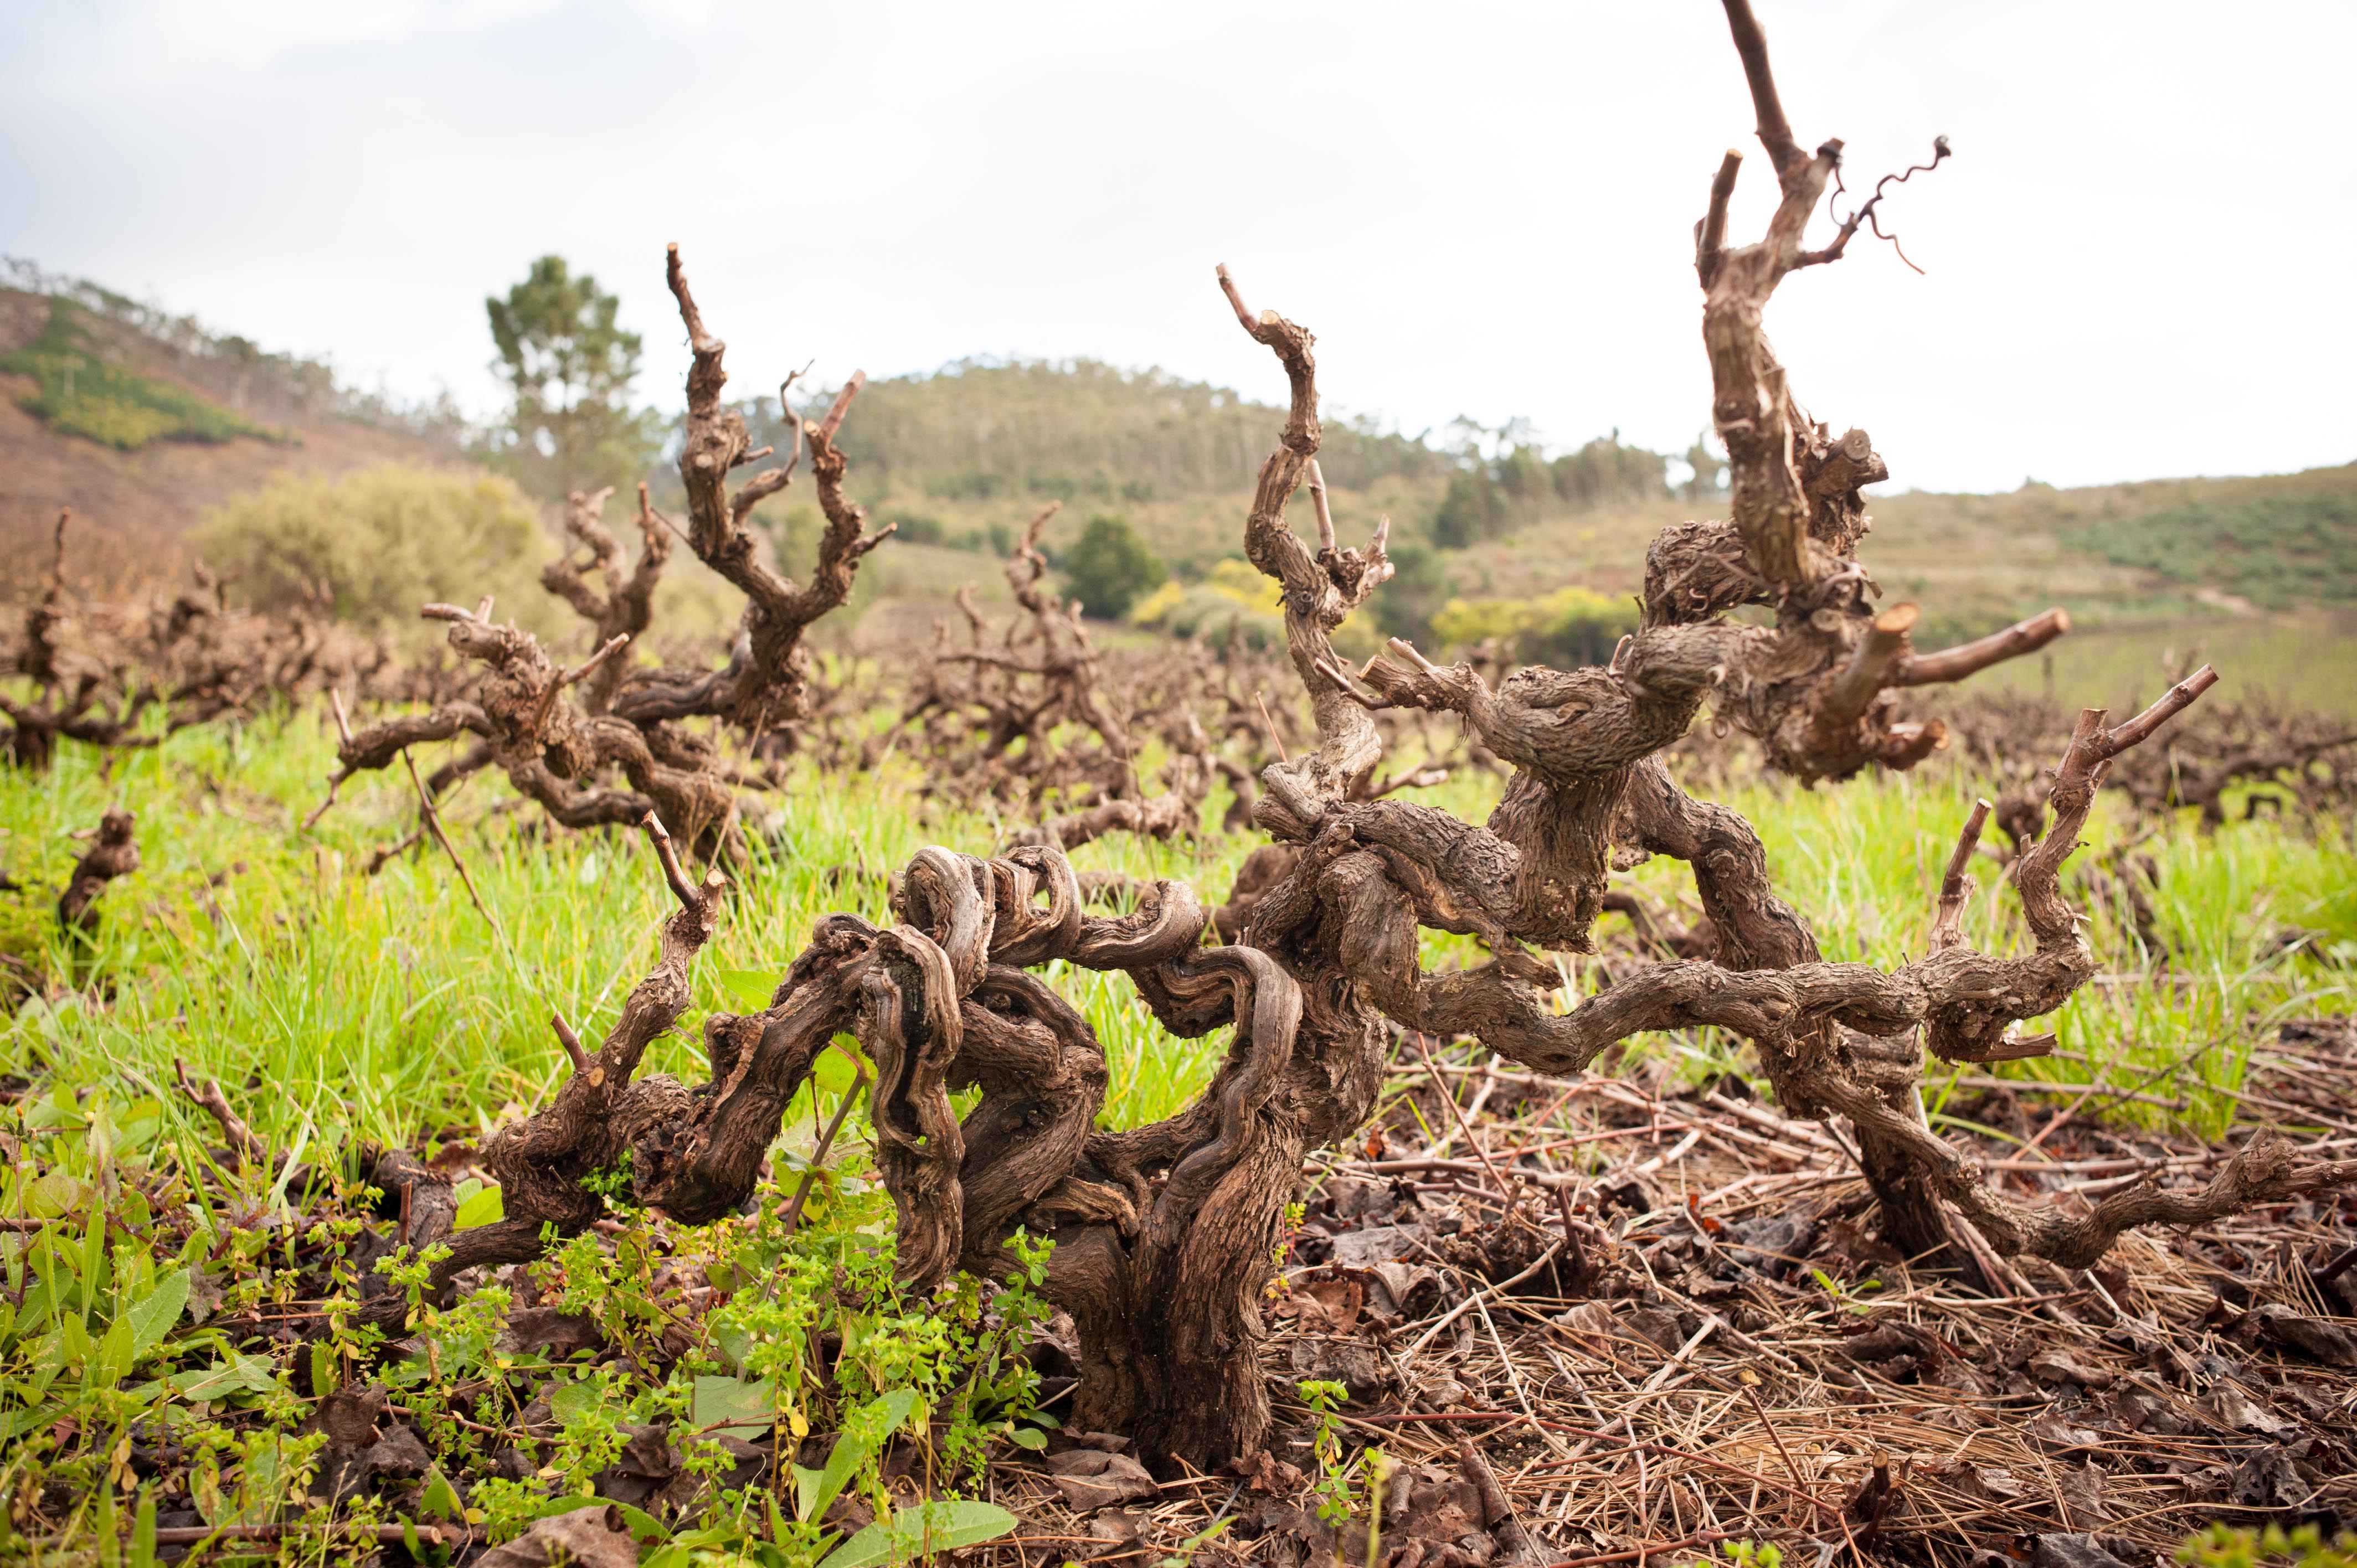 Buyer rewind: South Africa’s Old Vines are helping shape its future